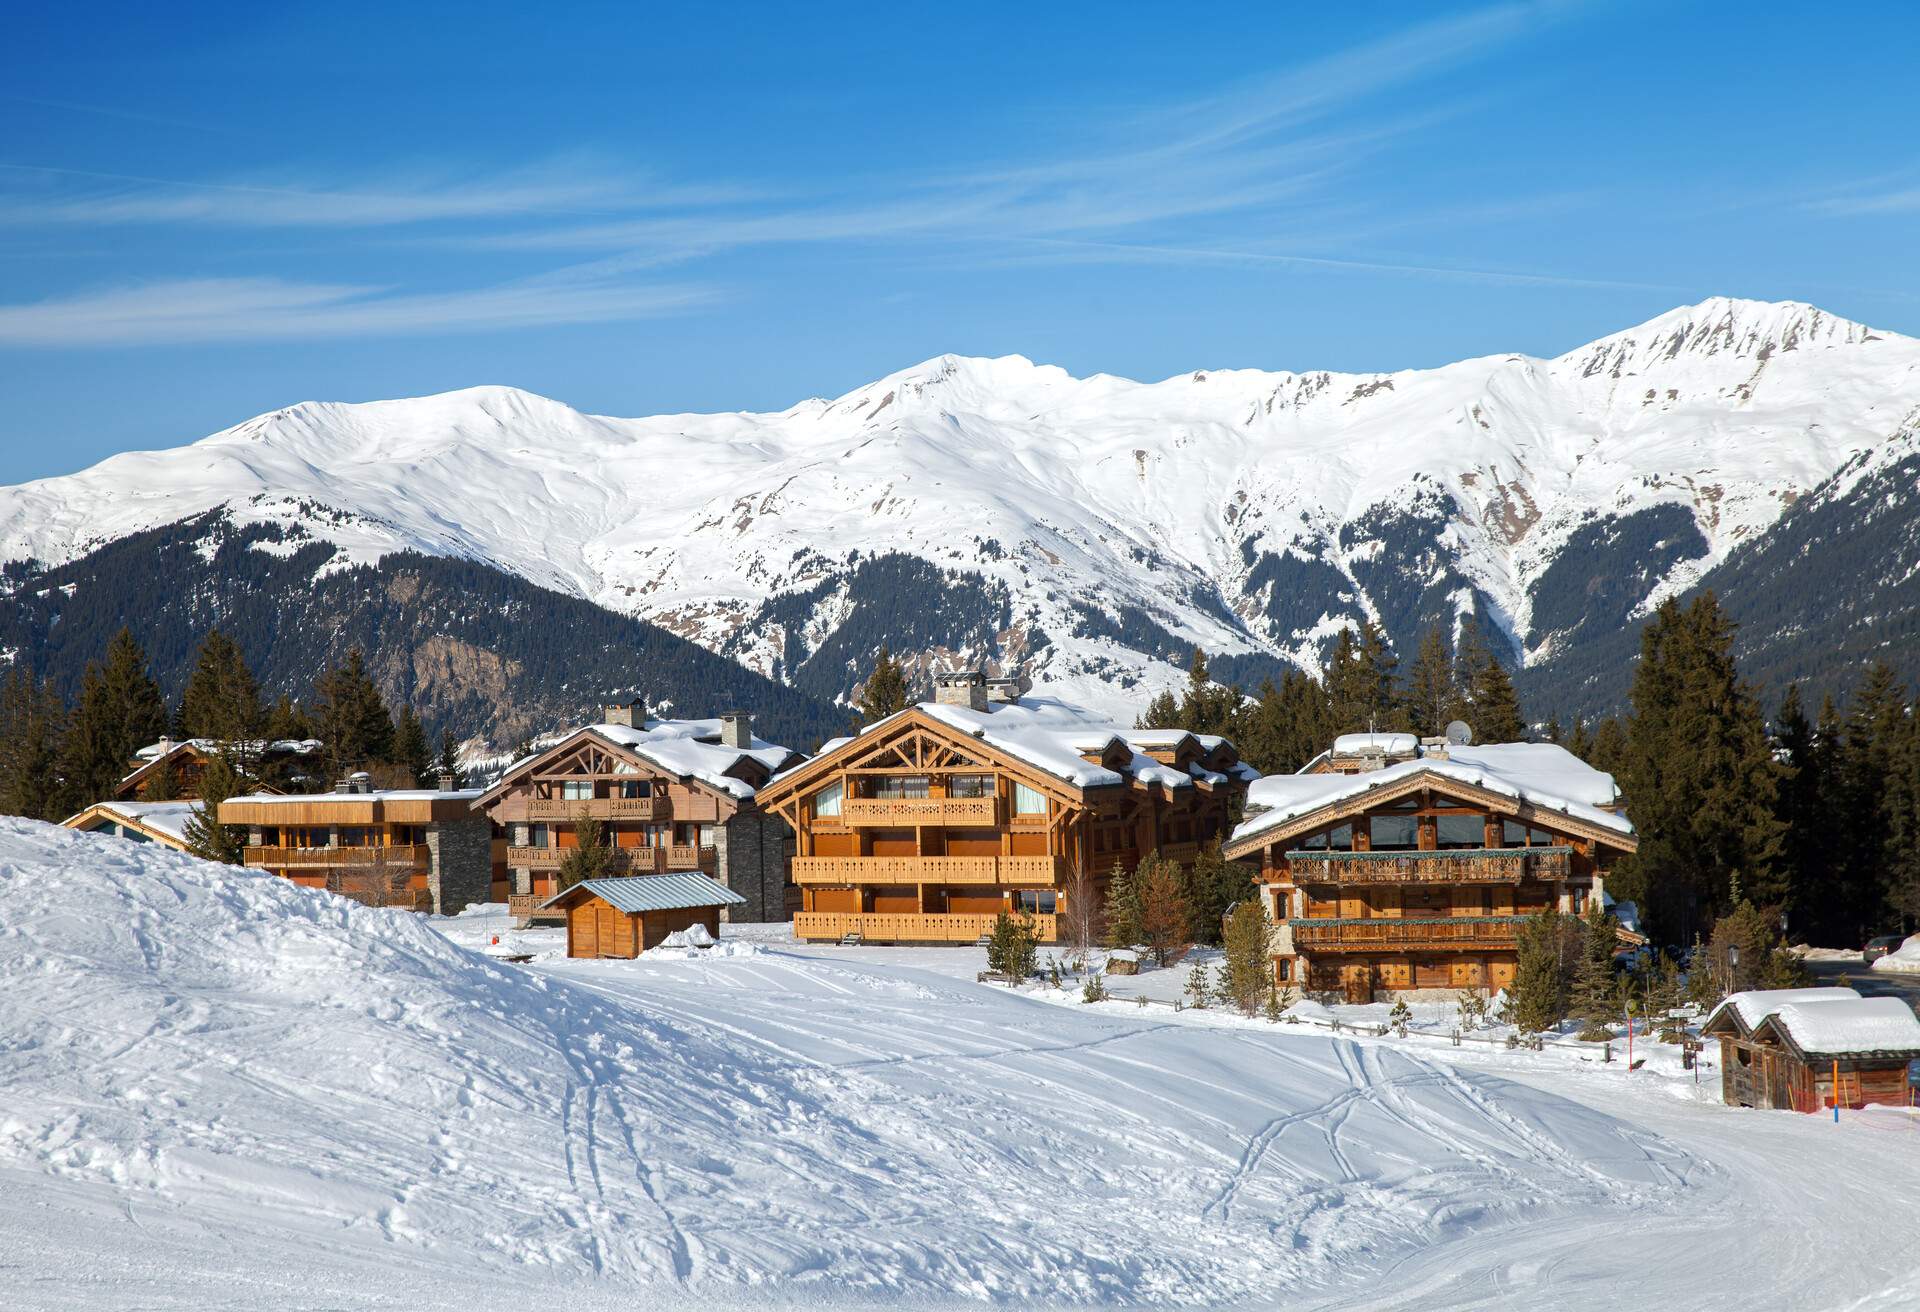 Chalets in French Alps on sunny winter day; Shutterstock ID 379512112